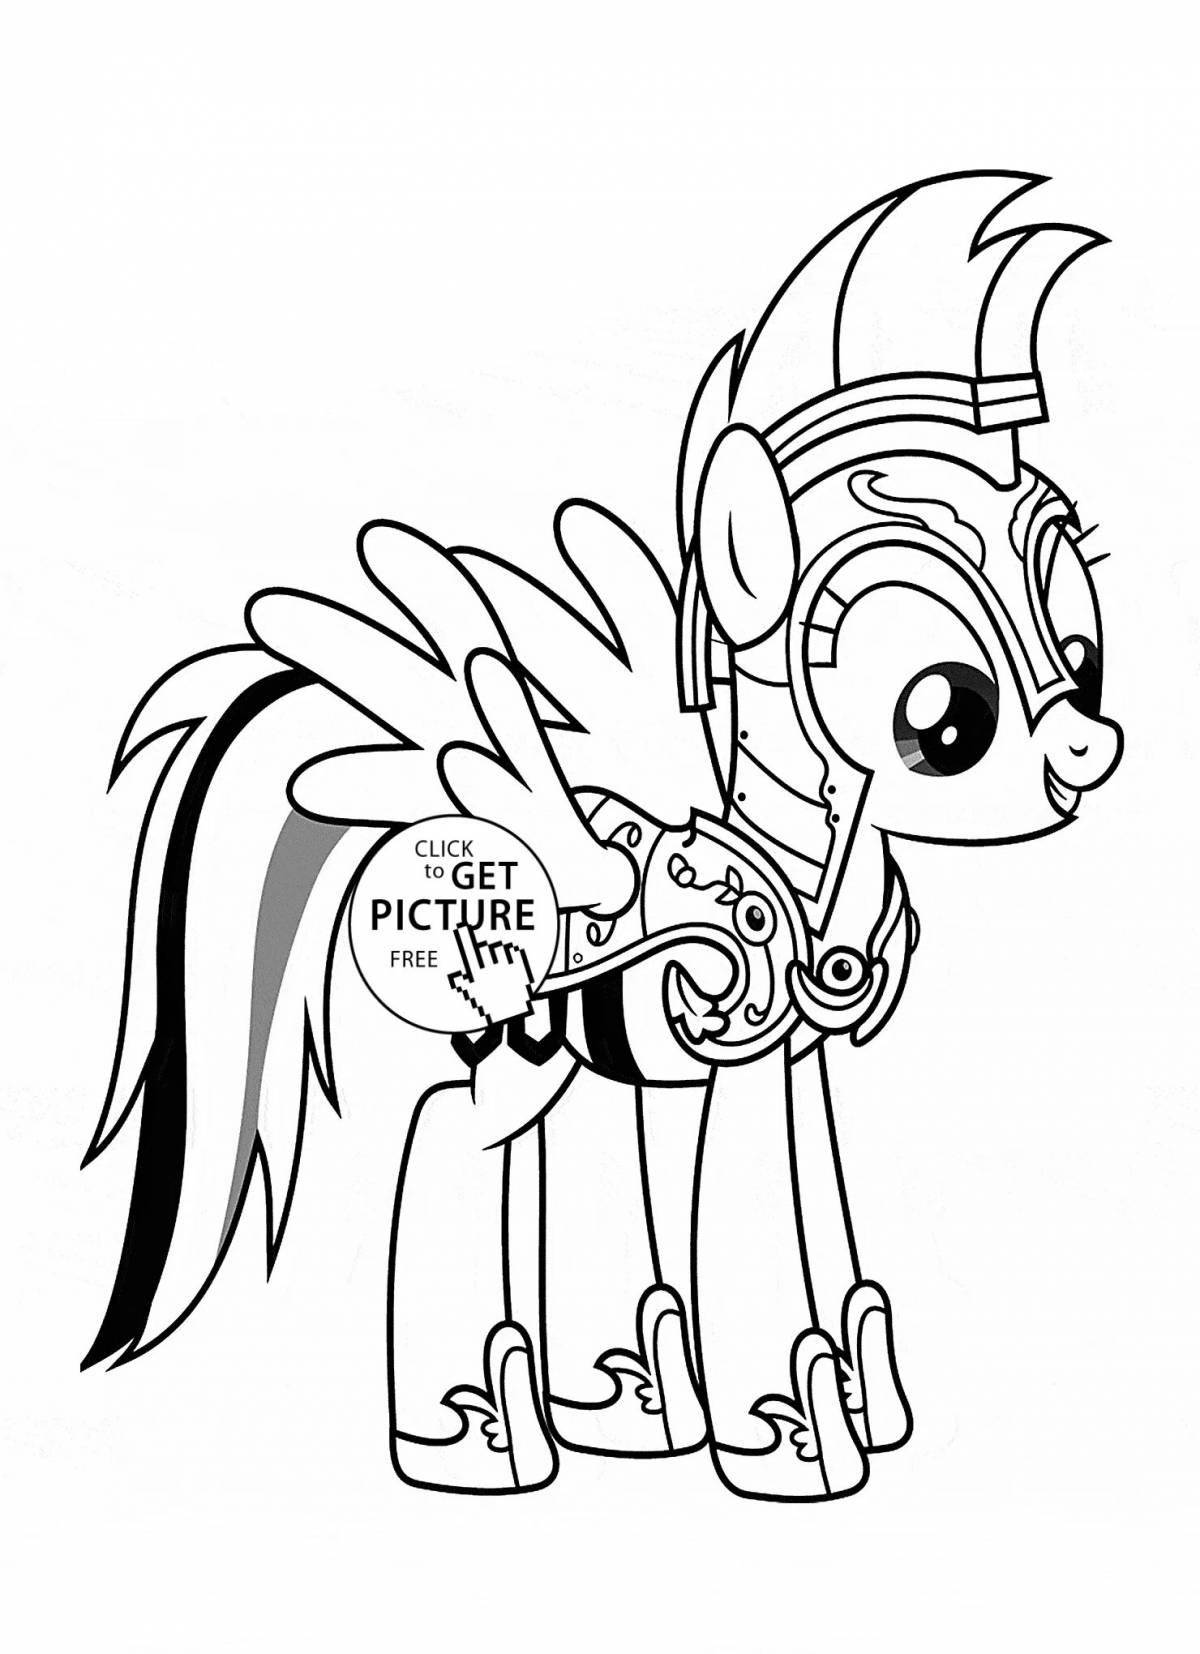 Animated rainbow pony coloring page